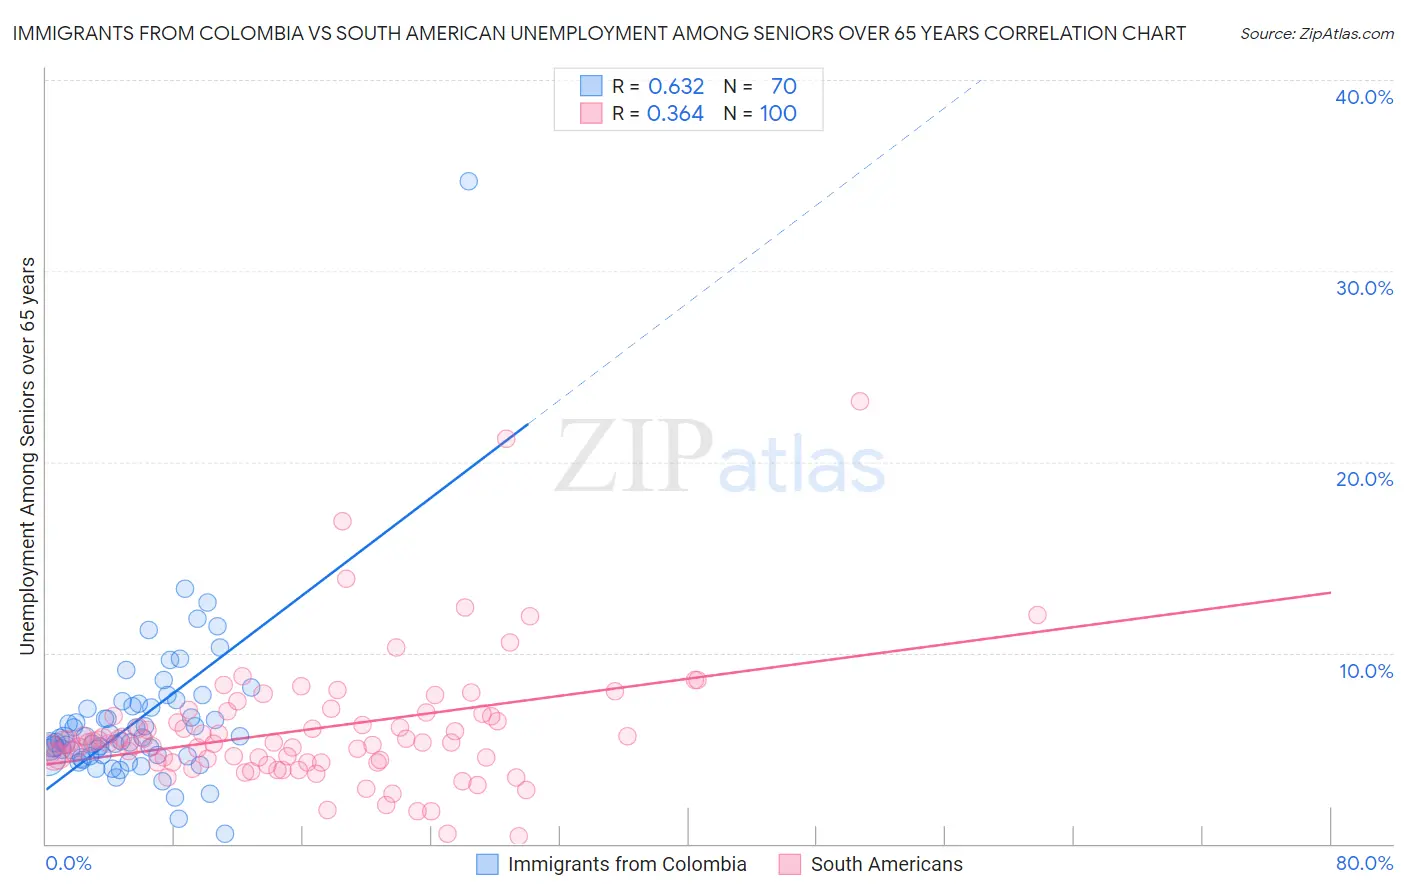 Immigrants from Colombia vs South American Unemployment Among Seniors over 65 years